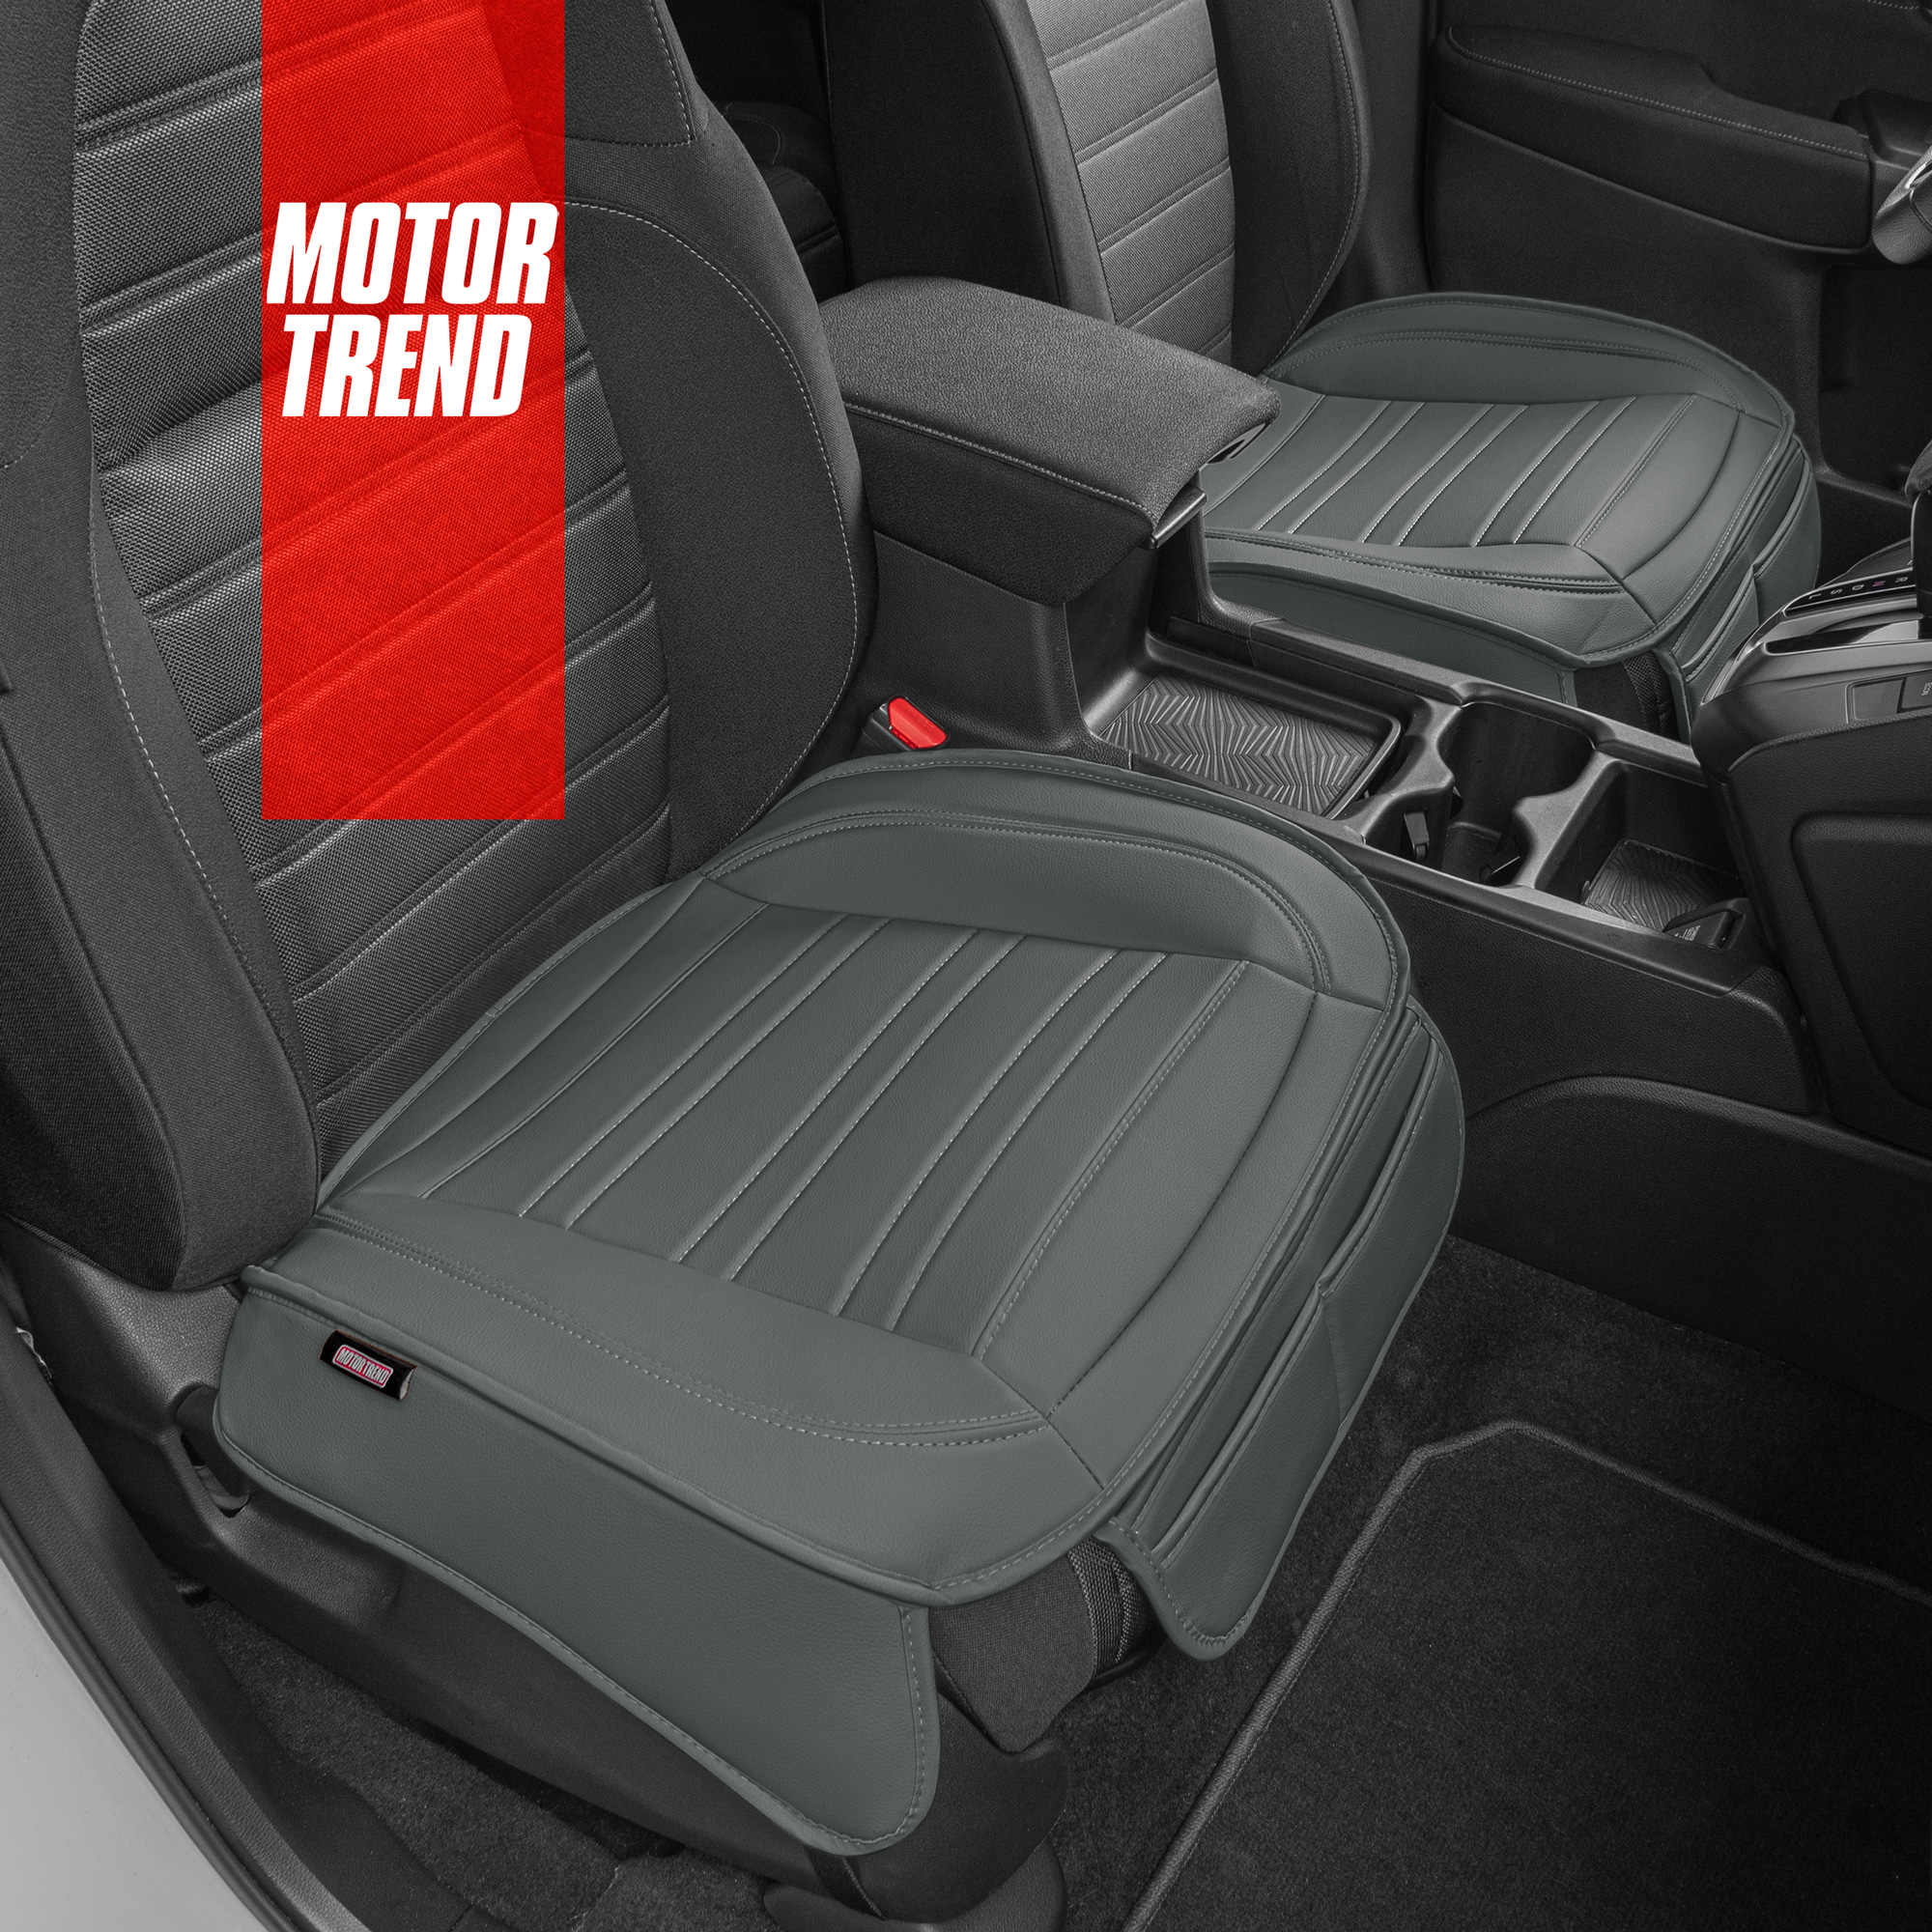 Motor Trend Car Seat Covers for Auto Truck SUV, Gray Faux Leather Front  Seat Covers for Cars, 2-Pack